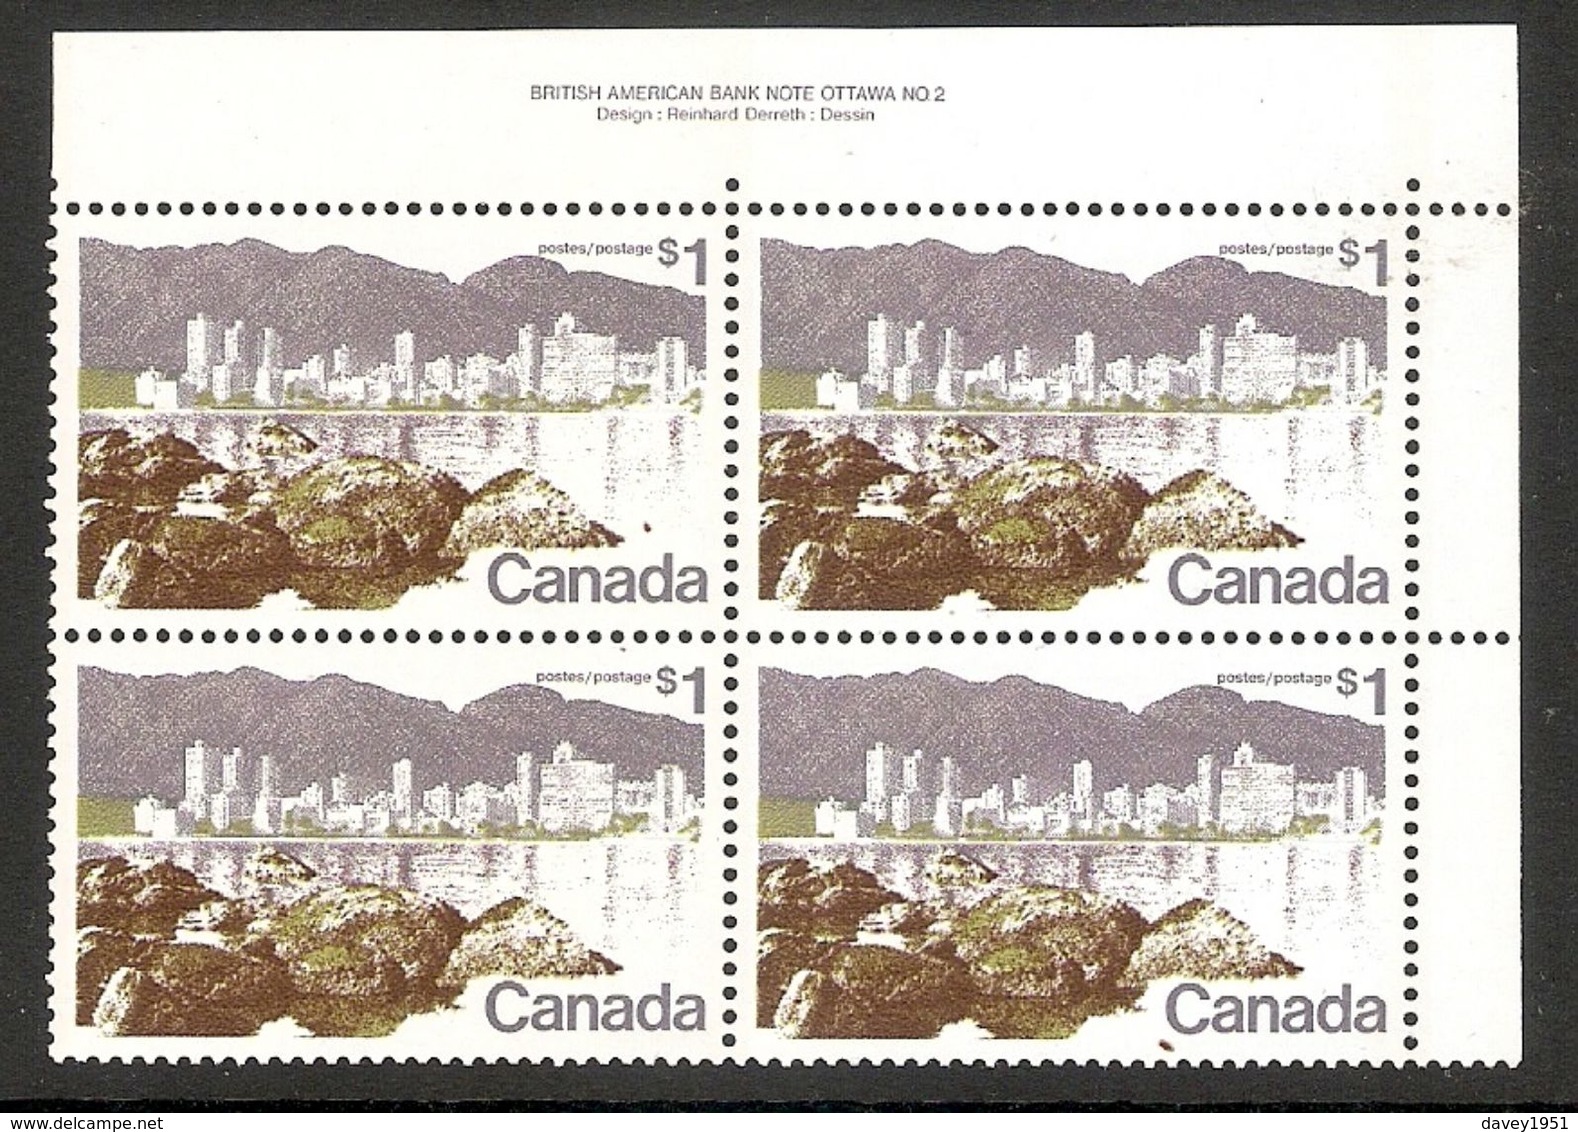 001531 Canada 1973 $1 Plate Block 2 UR MNH - Plate Number & Inscriptions